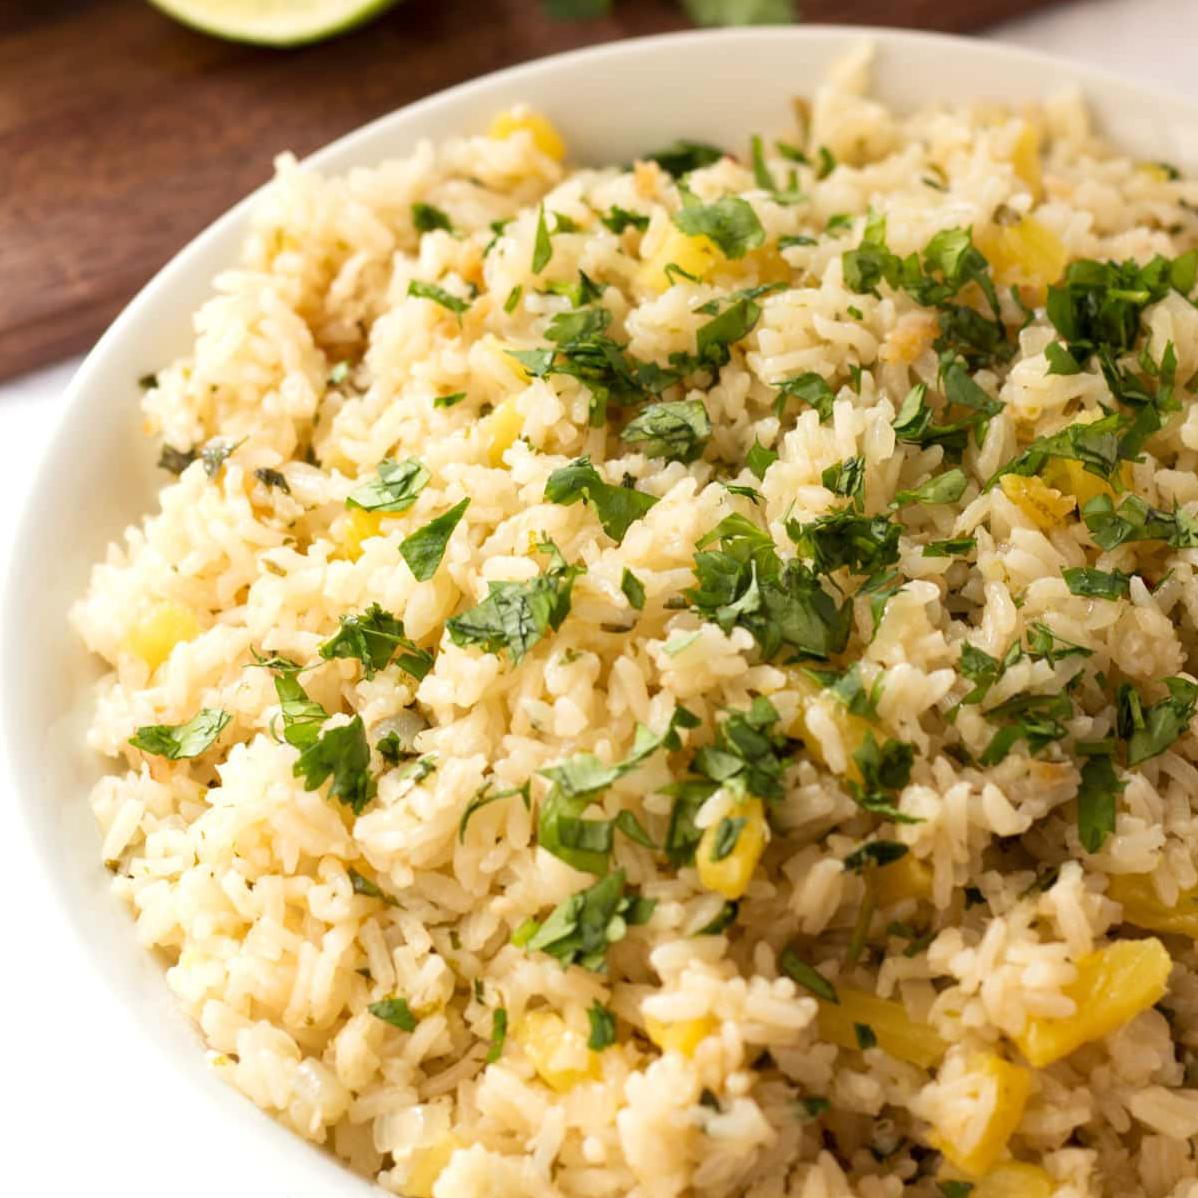  The aroma of freshly cooked rice mixed with lime and peanuts will make your mouth water.